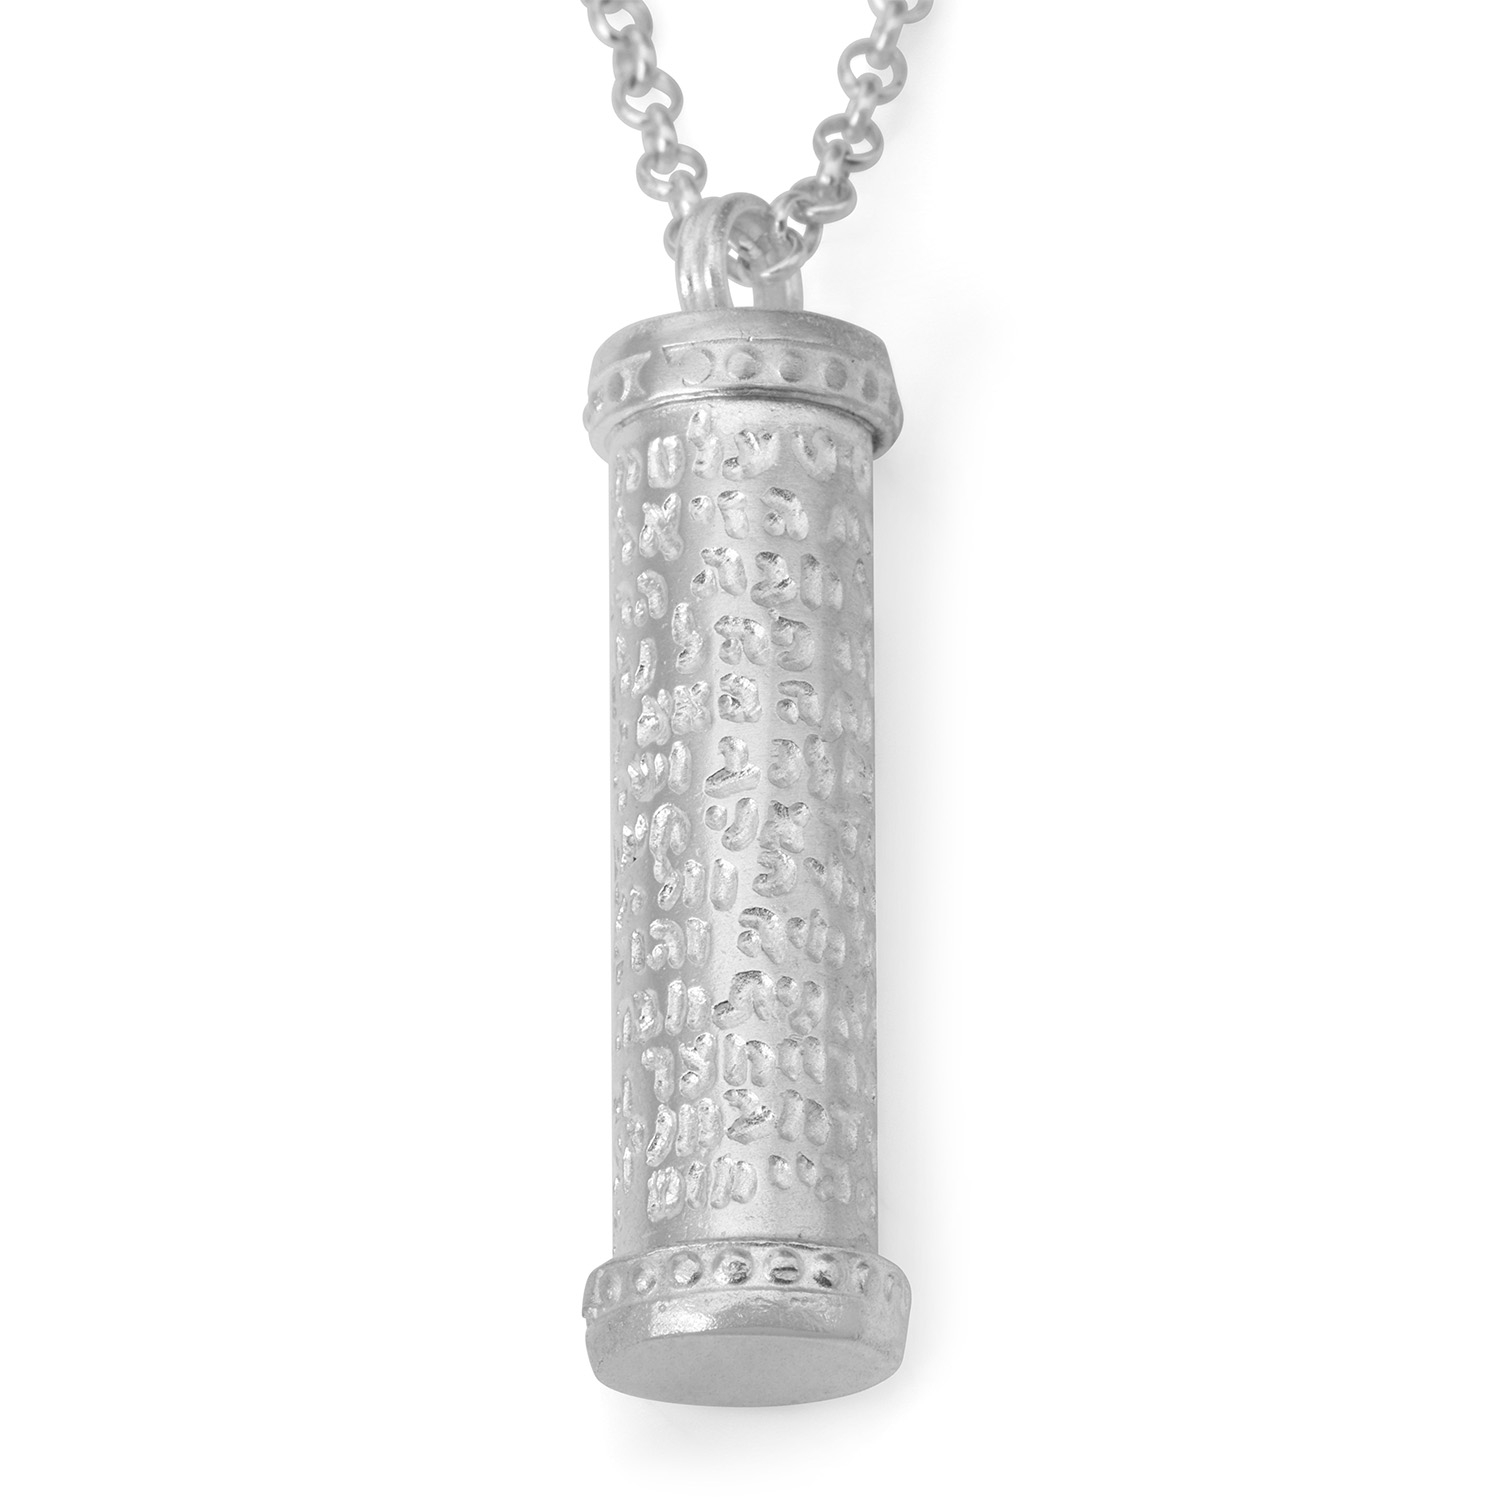 72 Holy Names: Sterling Silver Mezuzah Pendant Necklace - 1